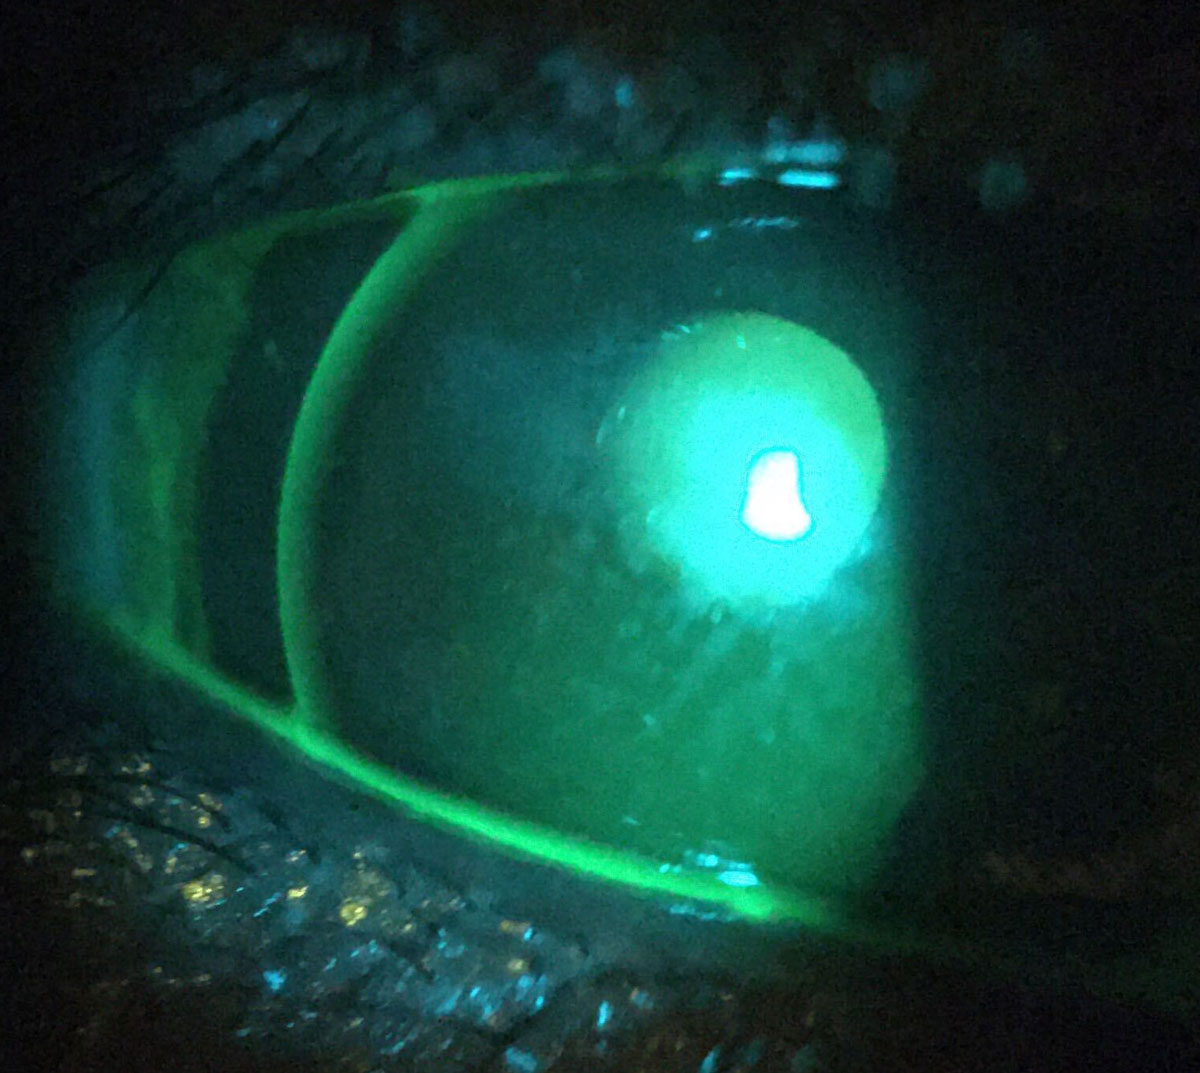 Fig. 3. Sodium fluorescein staining demonstrates front surface tear film break-up in this GP lens patient.